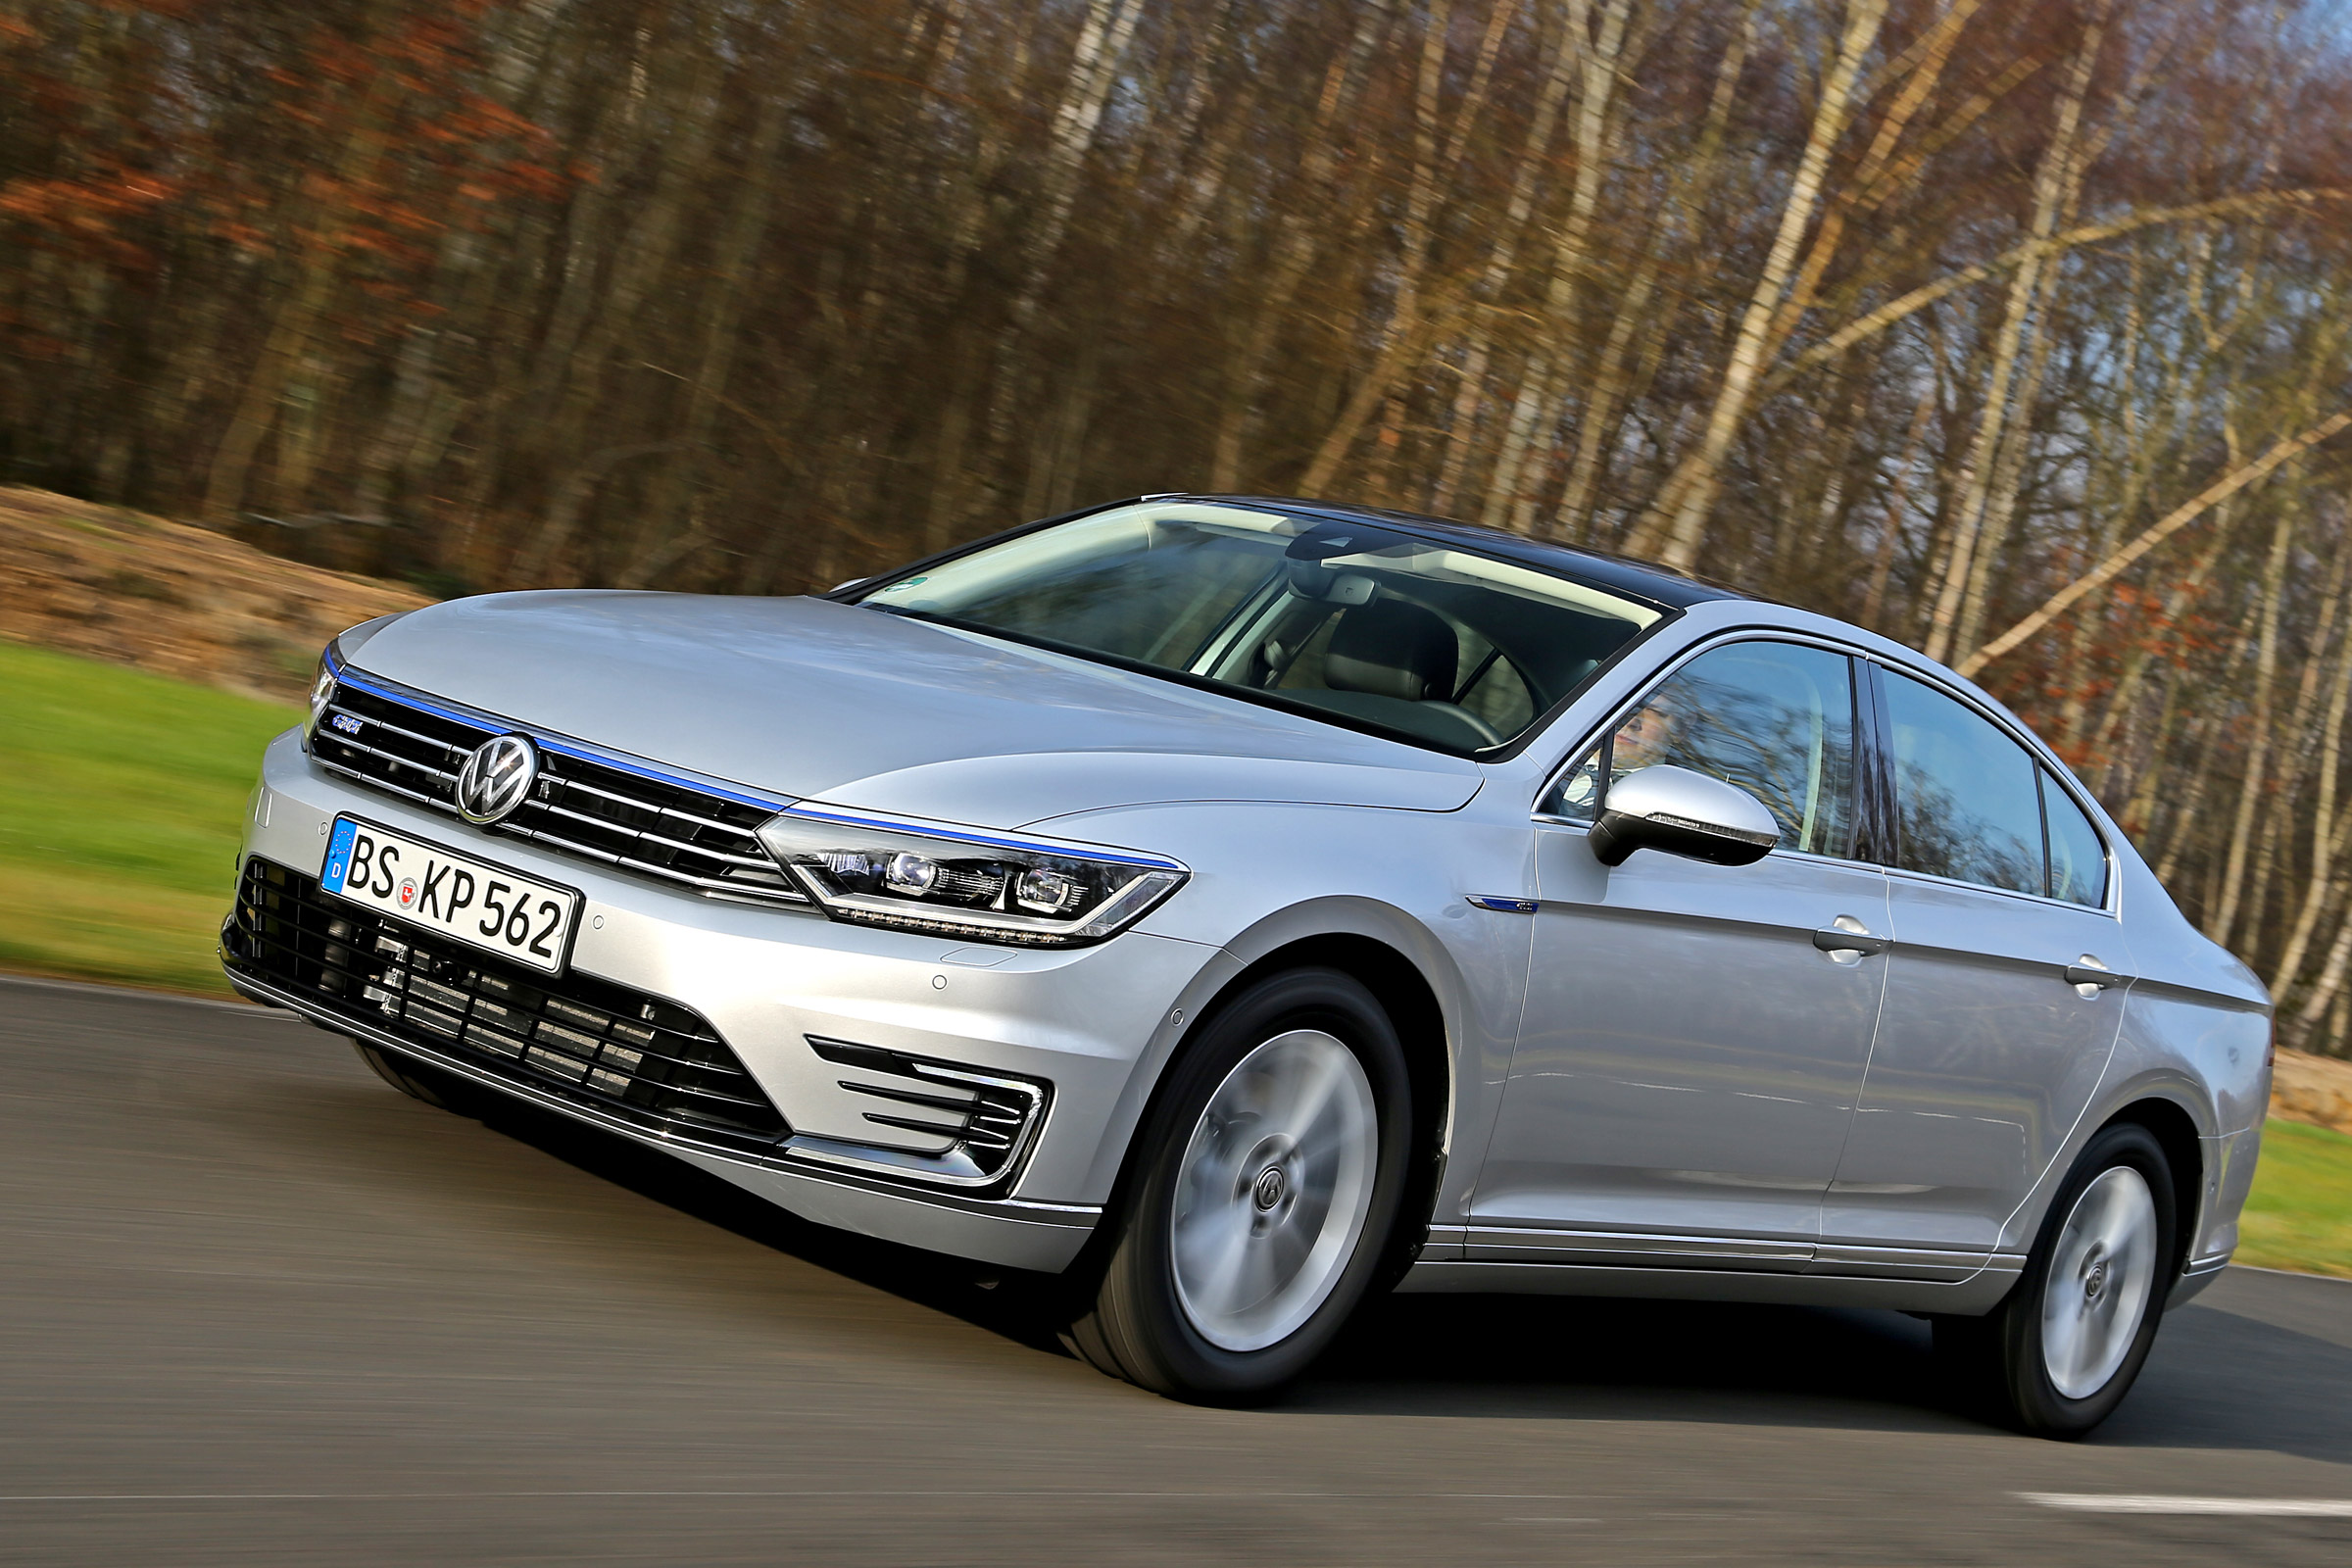 VW Passat GTE hybrid finally arrives in UK from £34,025 Auto Express